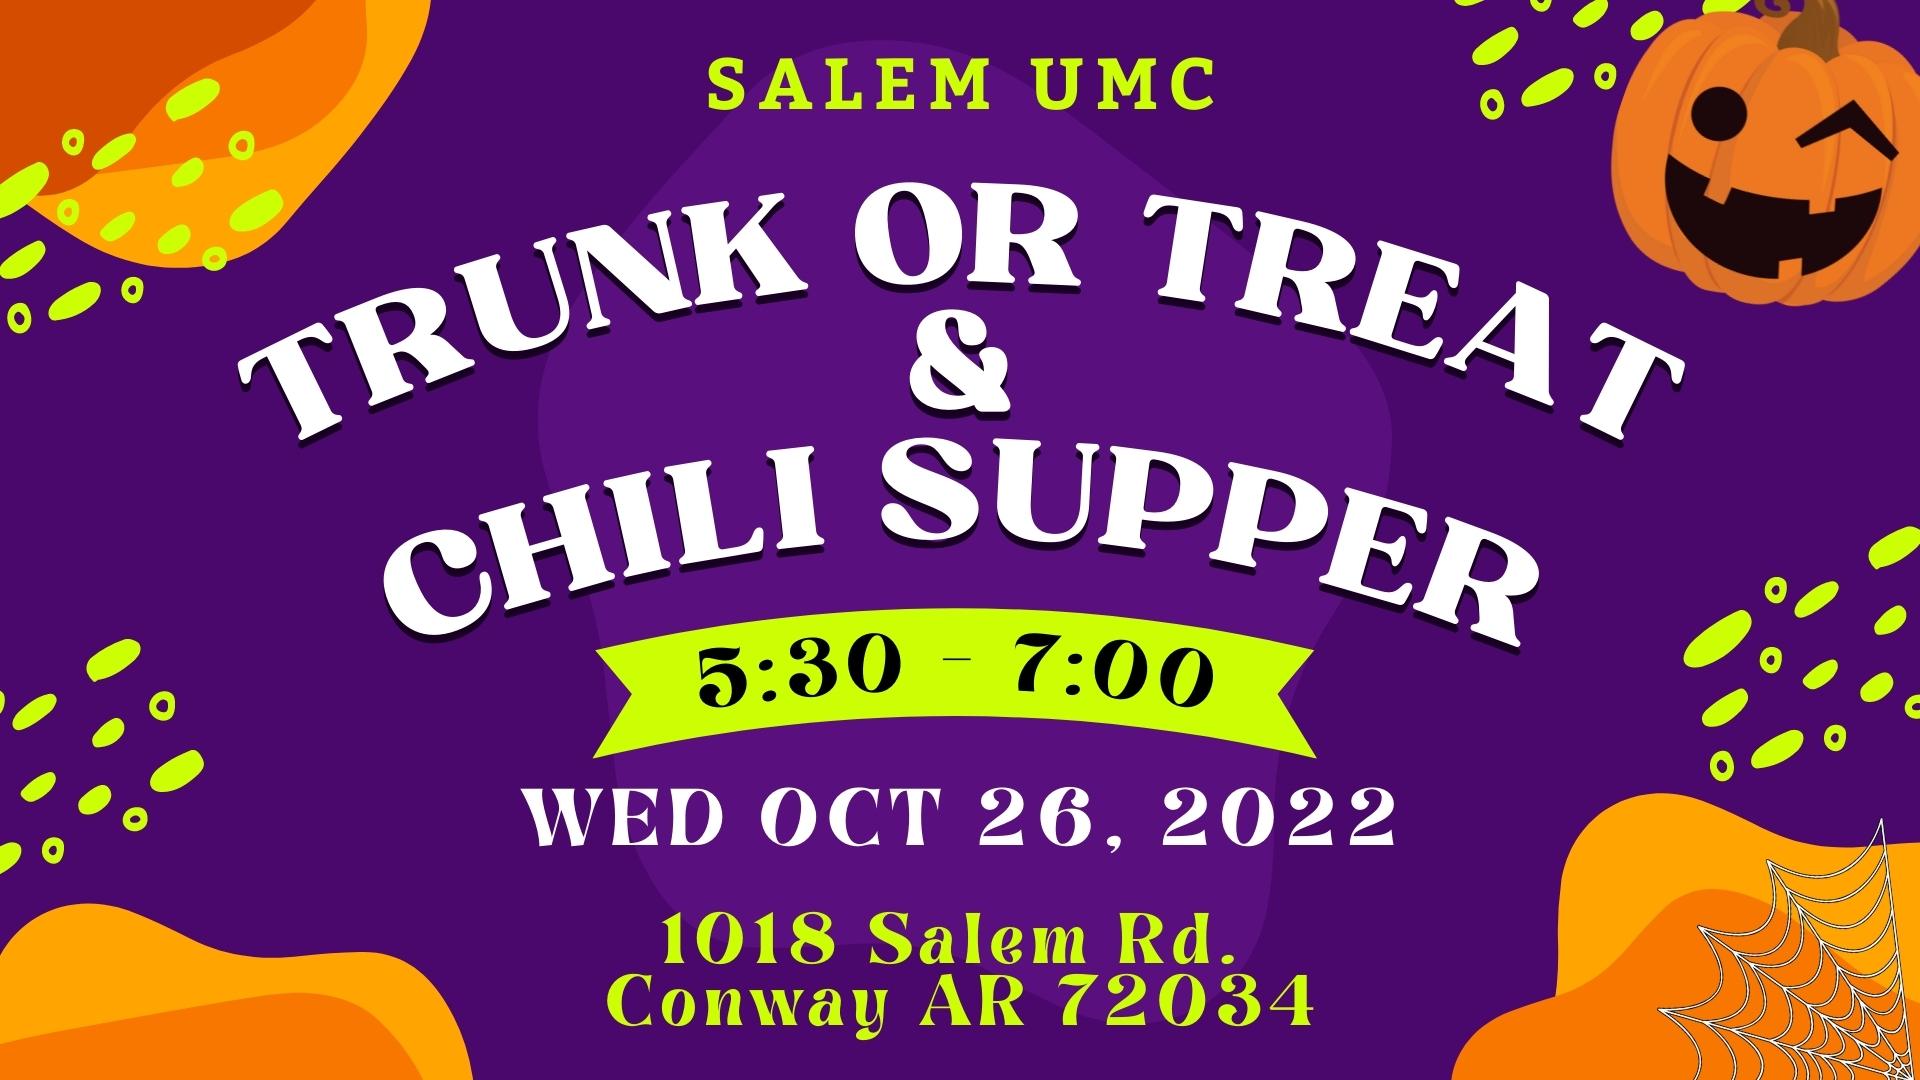 Salem UMC Trunk or Treat and Chili Supper